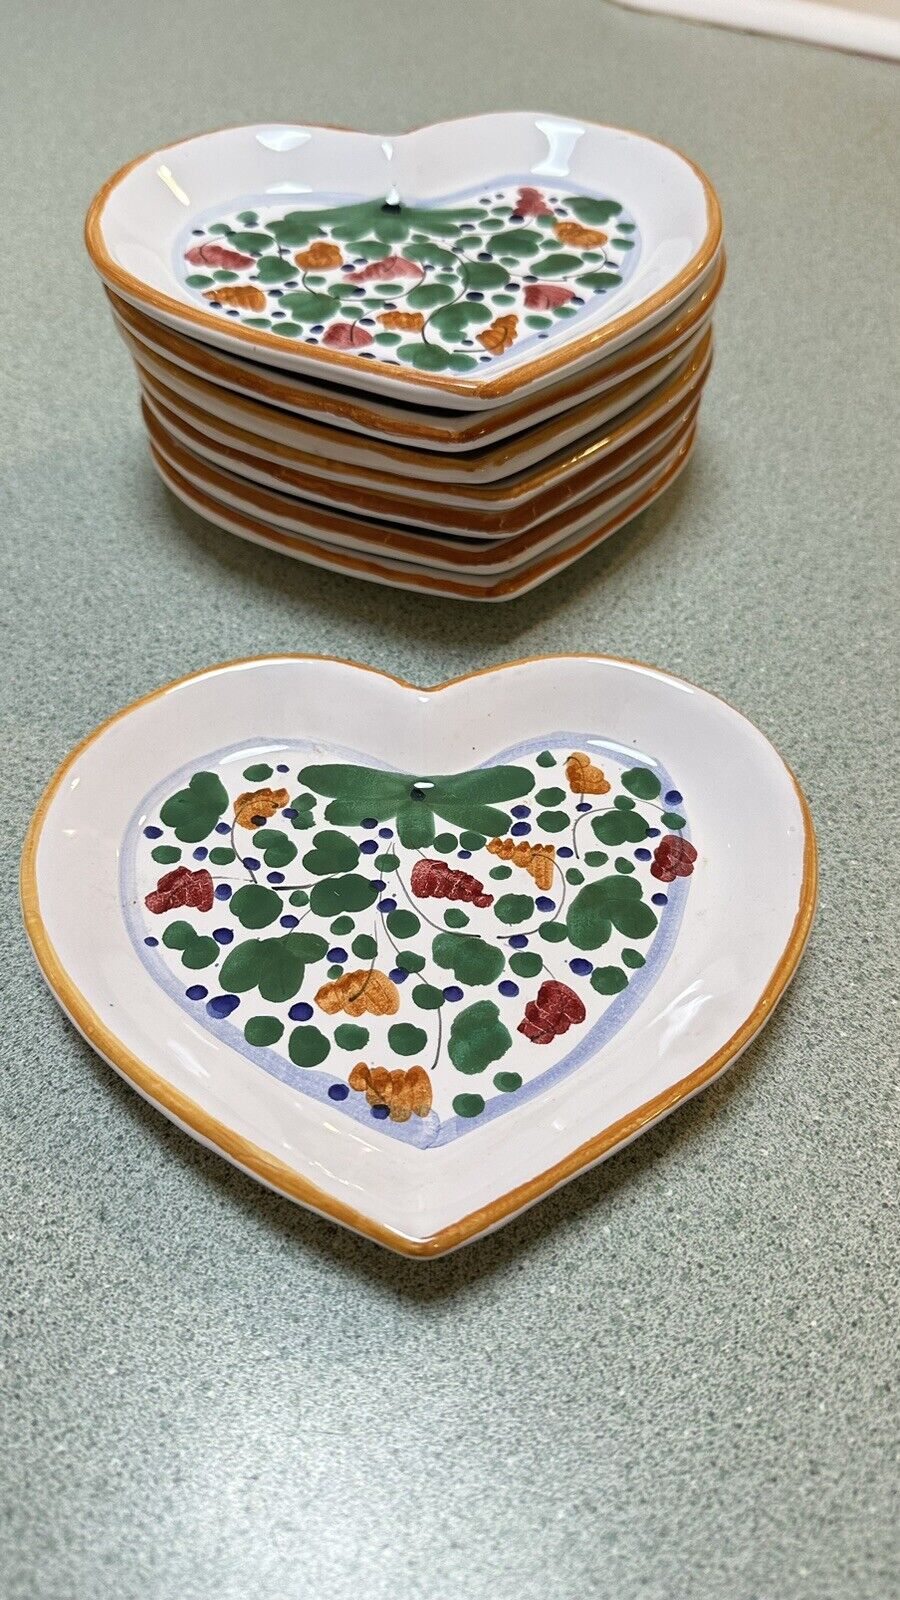 Medium Heart Shaped Hand Painted Decorative Ceramic Dish Plate Made in Italy